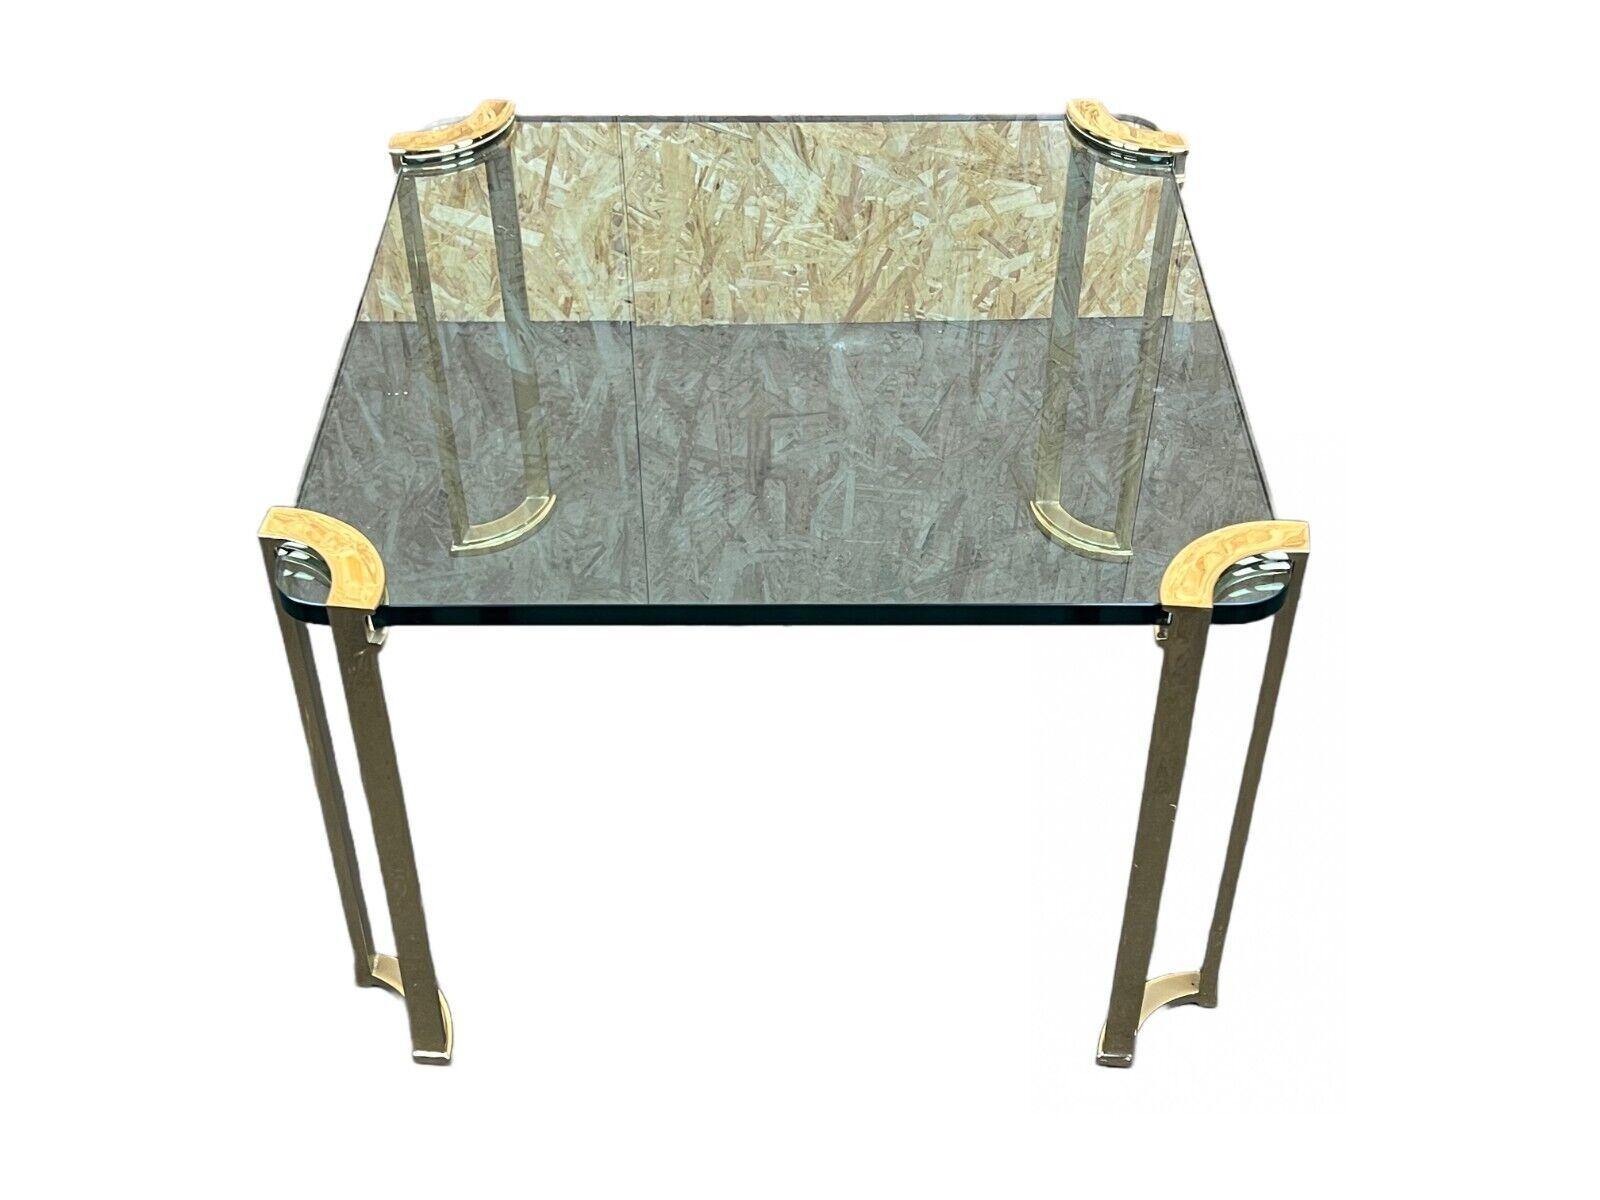 60s 70s Brutalist Bronze coffee table Peter Ghyczy coffee table Space Age Design

Object: coffee table

Manufacturer: Peter Ghyczy

Condition: good

Age: around 1960-1970

Dimensions:

Width = 67cm
Depth = 67cm
Height = 46.5cm

Other